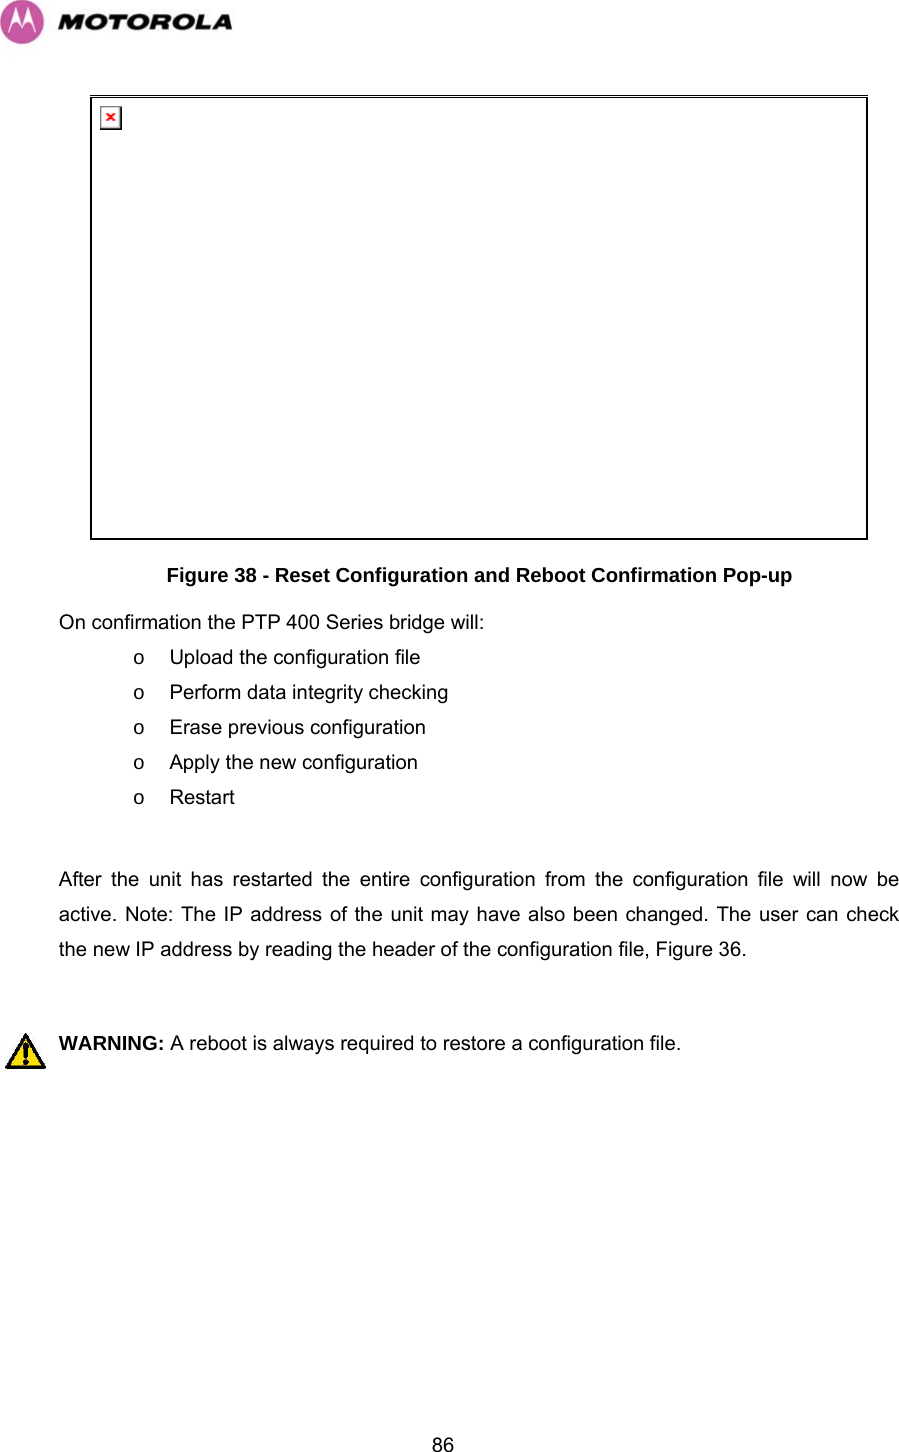   86 Figure 38 - Reset Configuration and Reboot Confirmation Pop-up On confirmation the PTP 400 Series bridge will: o  Upload the configuration file o  Perform data integrity checking  o Erase previous configuration o  Apply the new configuration o Restart  After the unit has restarted the entire configuration from the configuration file will now be active. Note: The IP address of the unit may have also been changed. The user can check the new IP address by reading the header of the configuration file, Figure 36.  WARNING: A reboot is always required to restore a configuration file. 